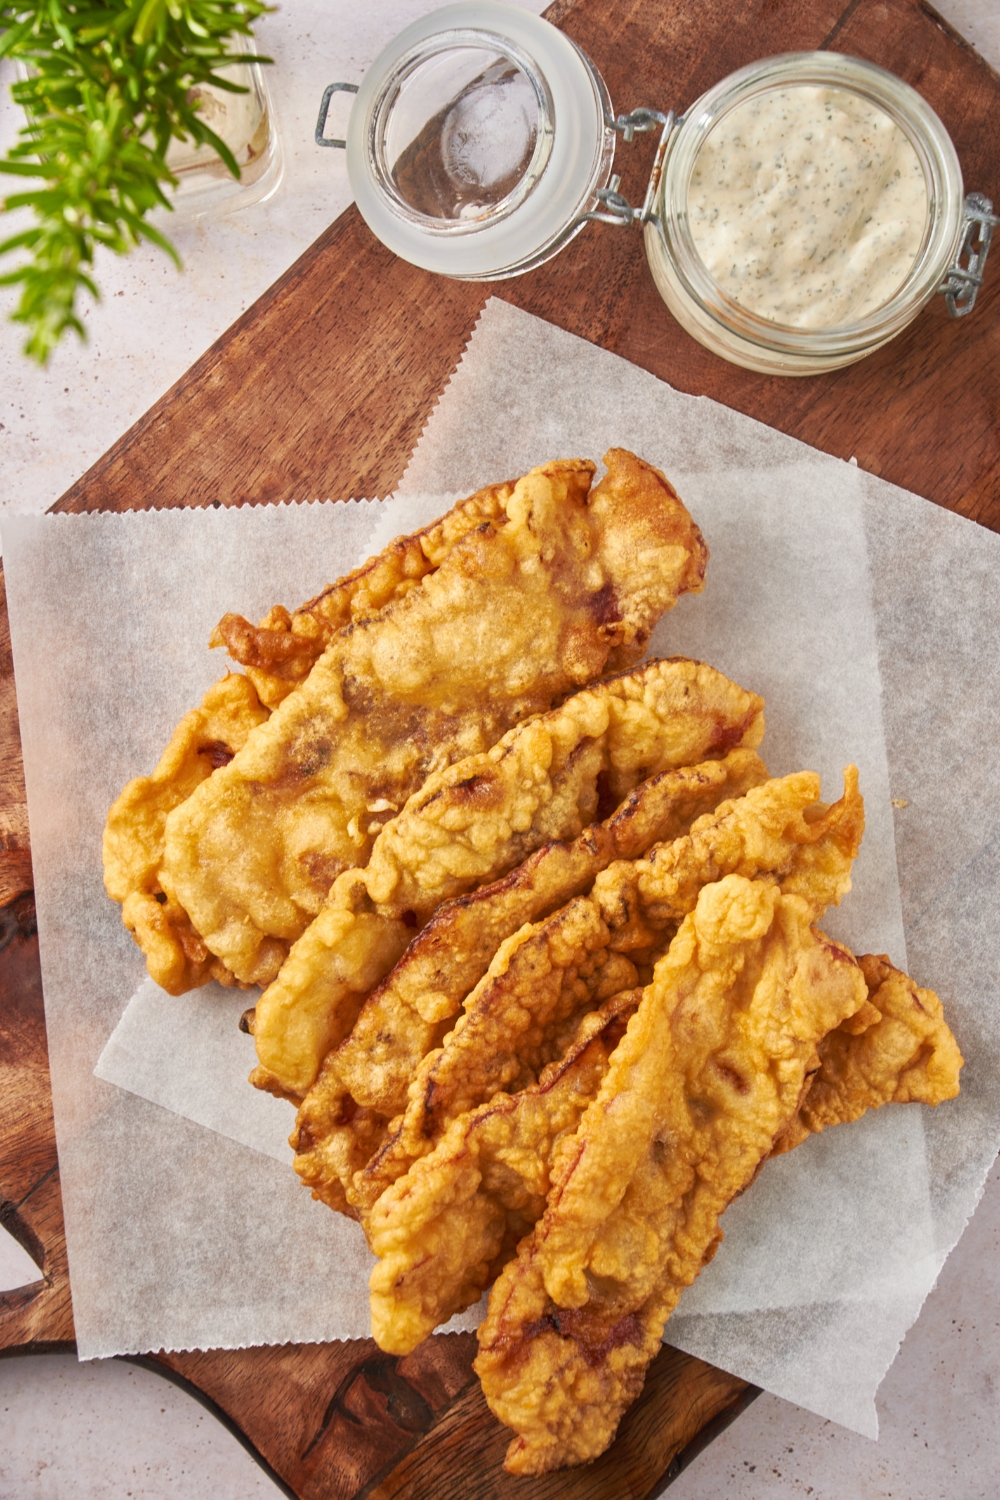 A pile of golden brown deep fried bacon spilled out over two sheets of wax paper, next to a jar of dipping sauce.